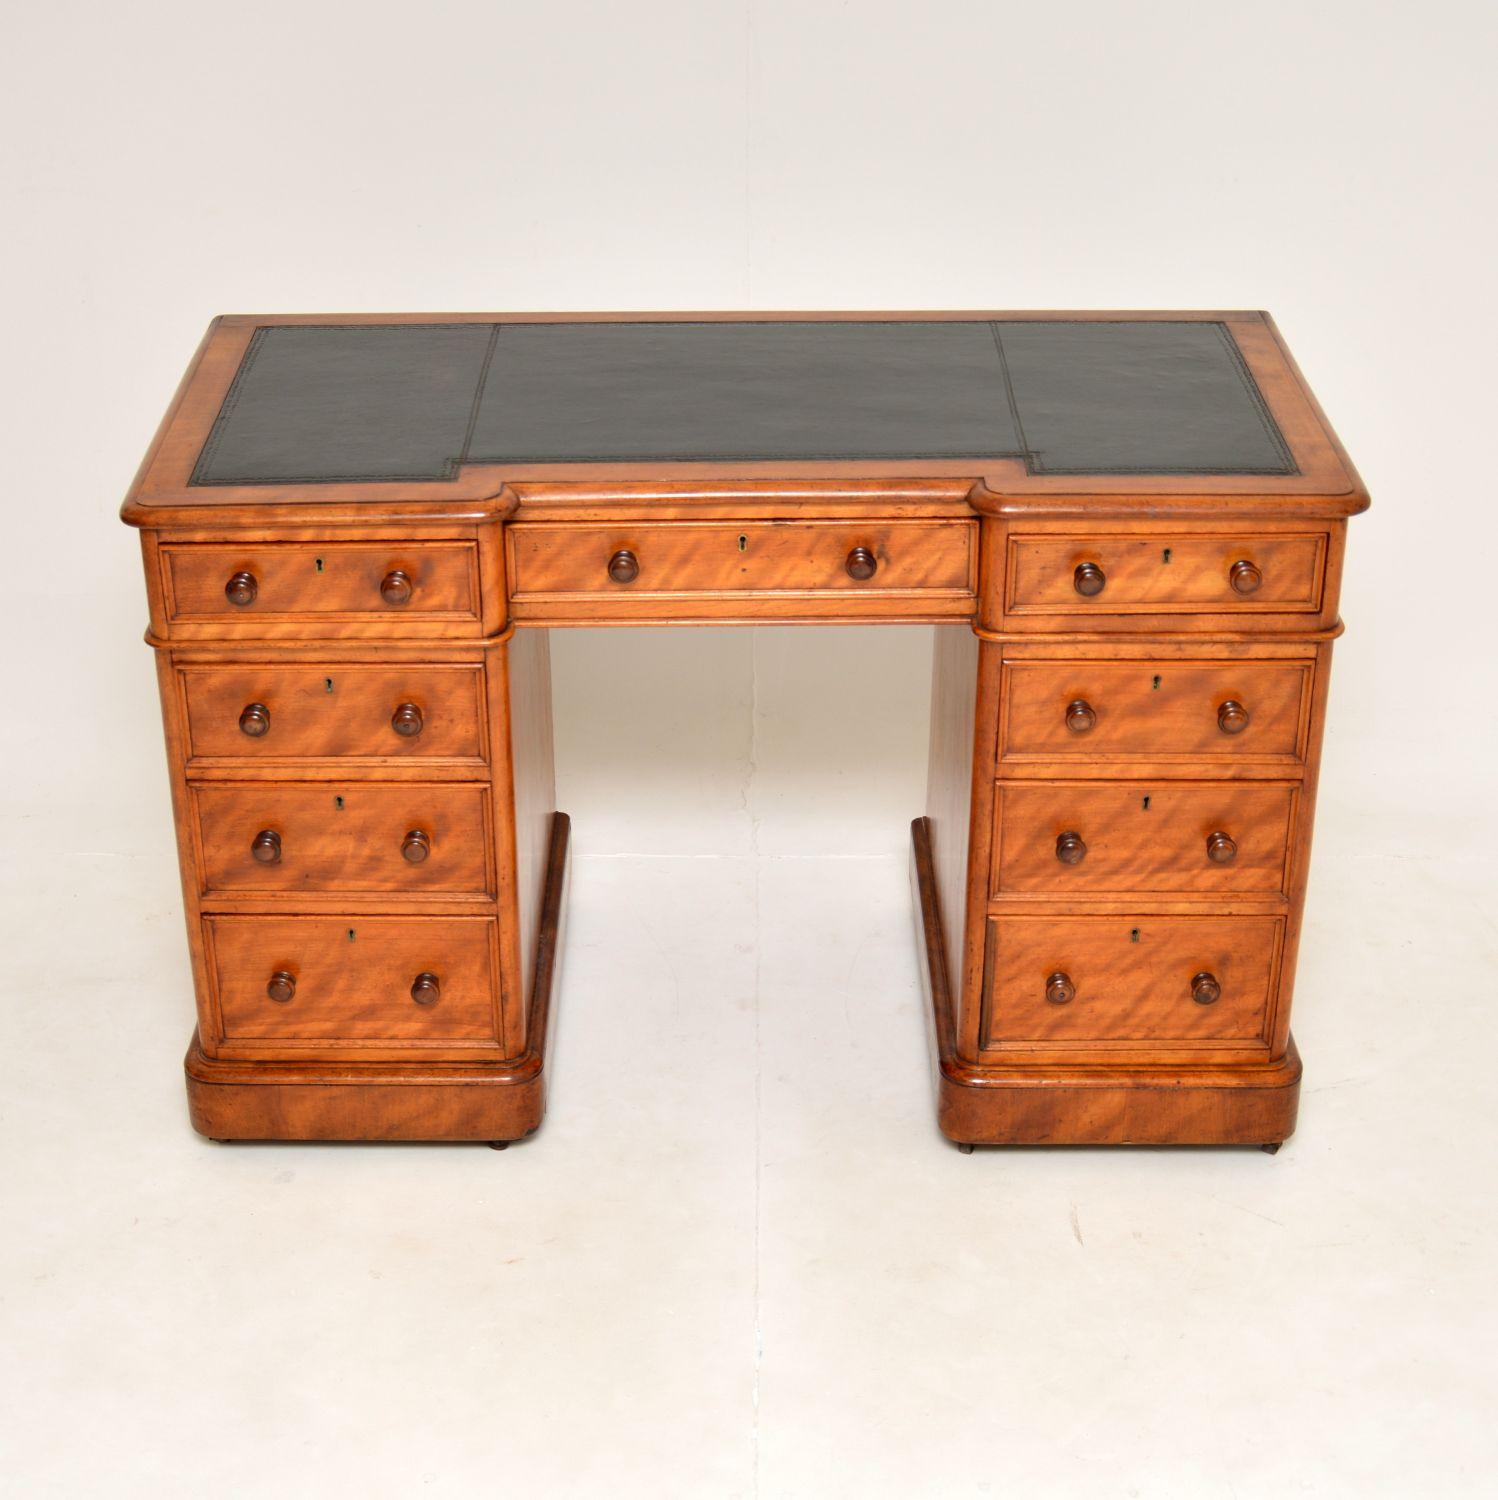 A superb antique Victorian pedestal desk, beautifully made from satin wood. This was made in England, it dates from around the 1860-1880 period.

It is of very fine quality, with a lovely inverted breakfront design. It sits on plinth bases with